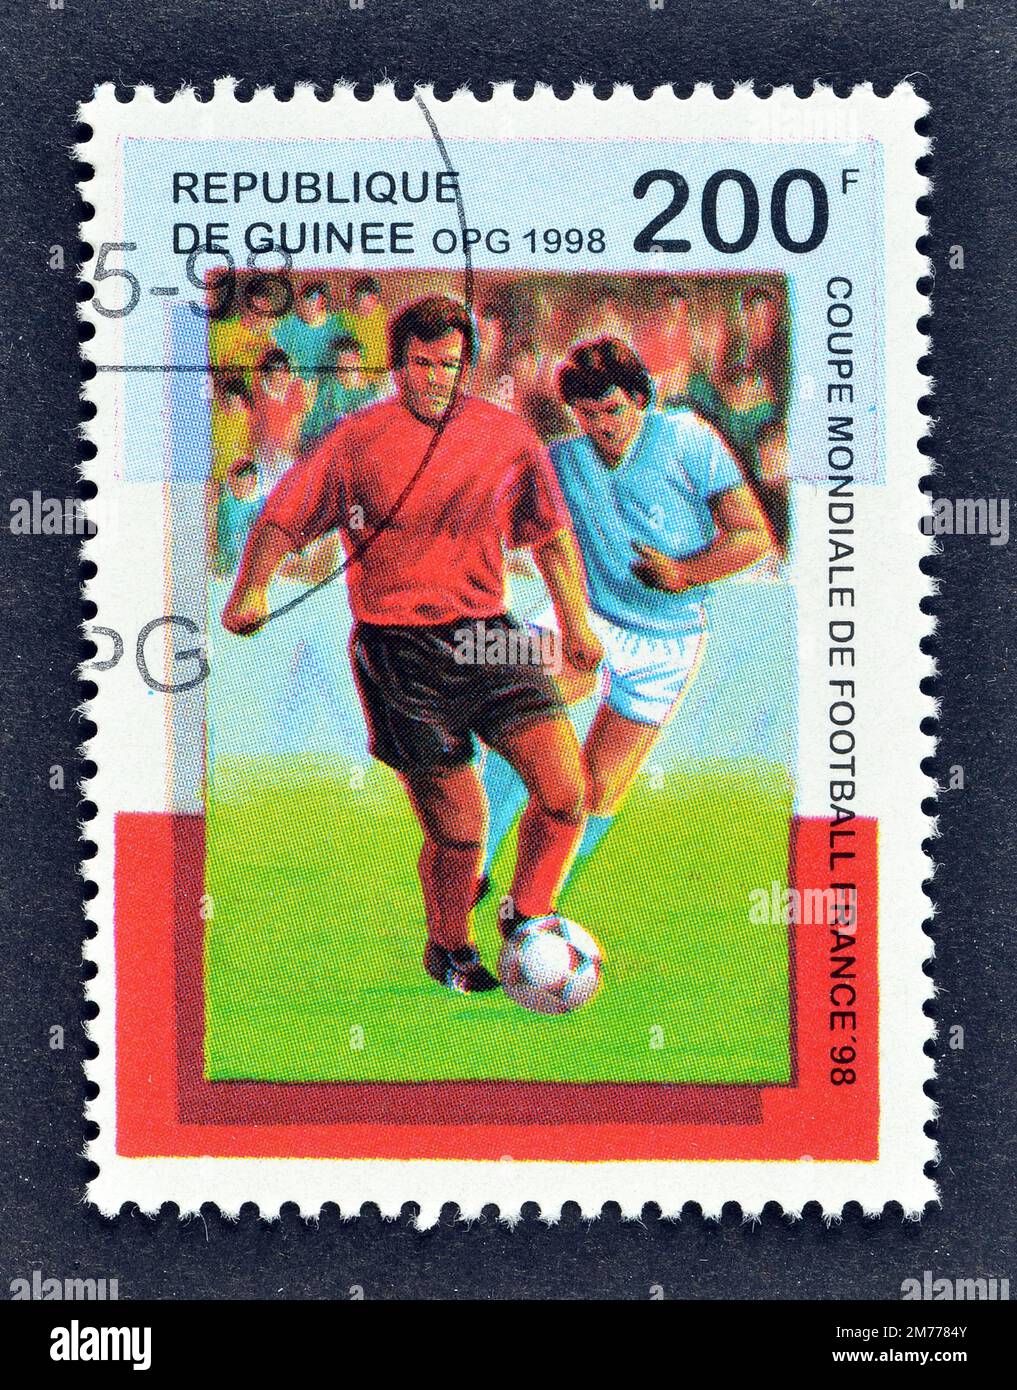 FRANCE - CIRCA 1998: a stamp printed in the France shows Soccer